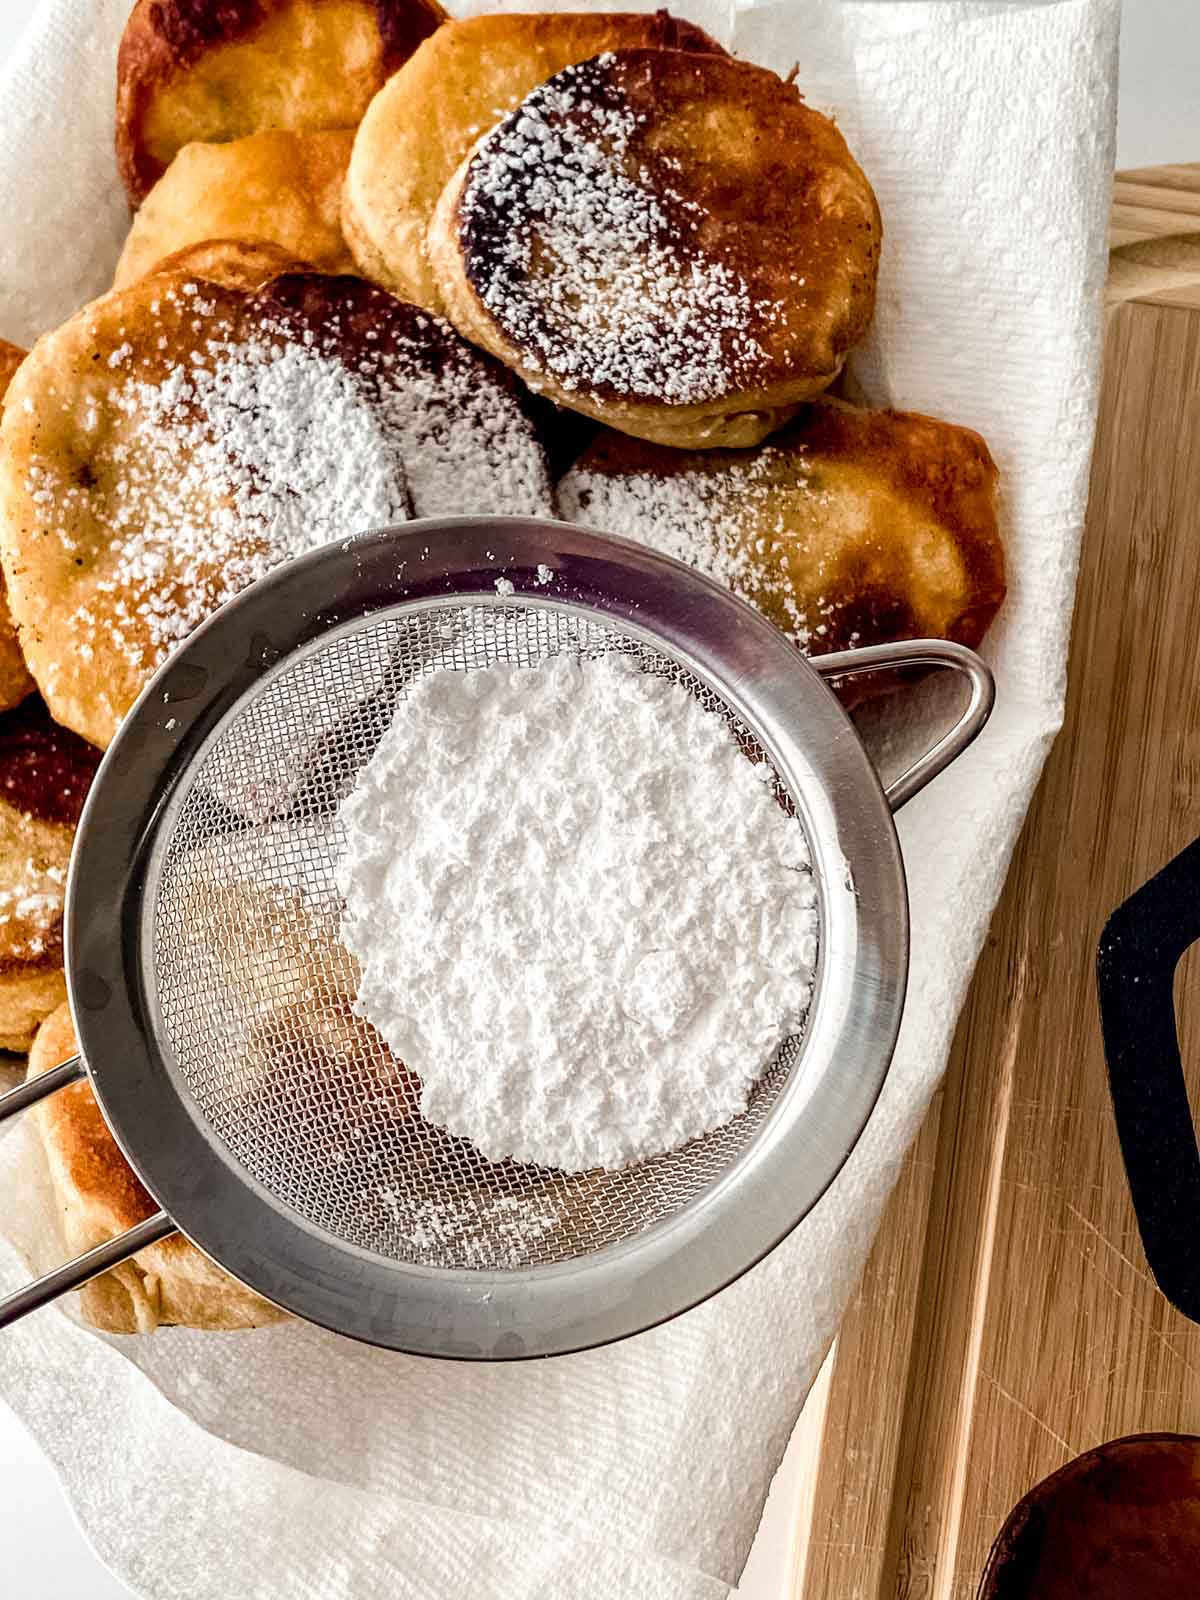 Powdered sugar over the fried biscuits.